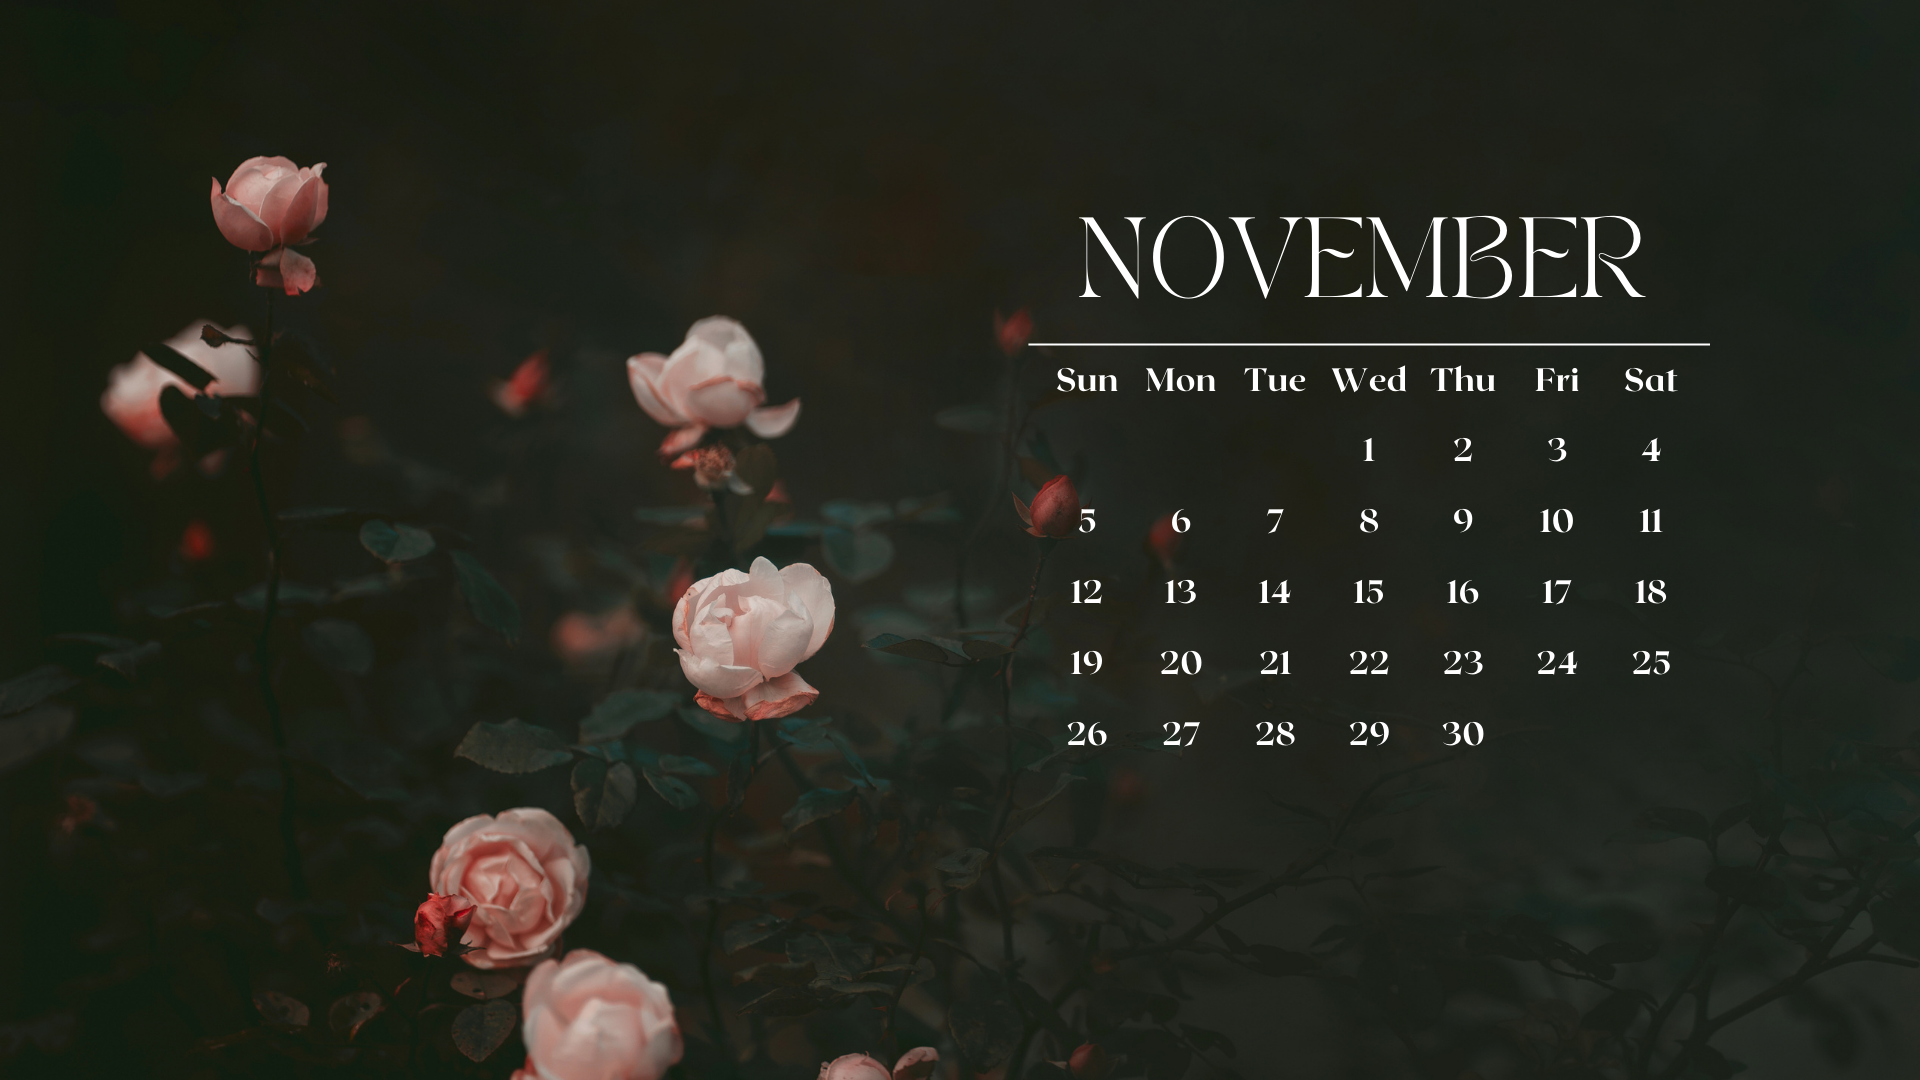 Free, Downloadable Tech Backgrounds for November 2021!